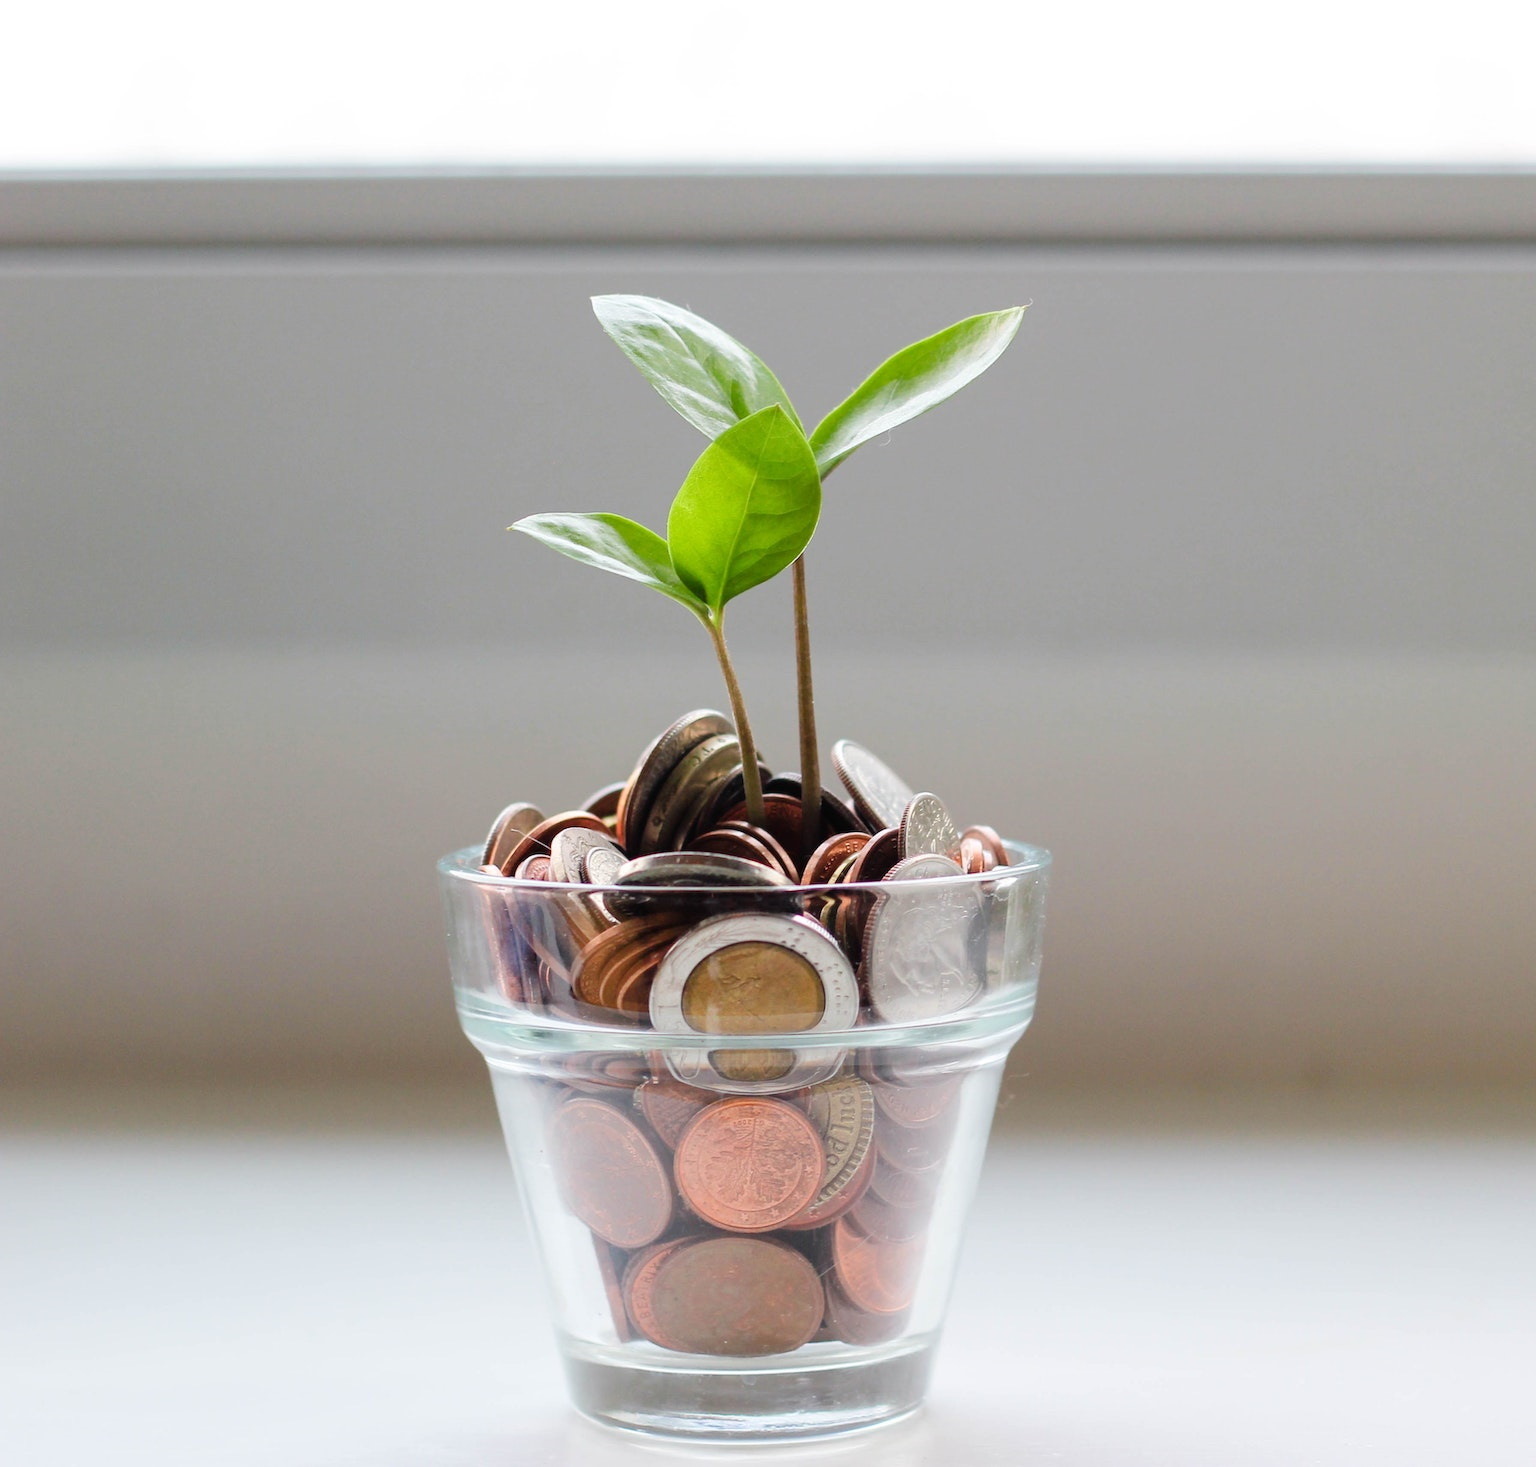 sprout in a glass of coins